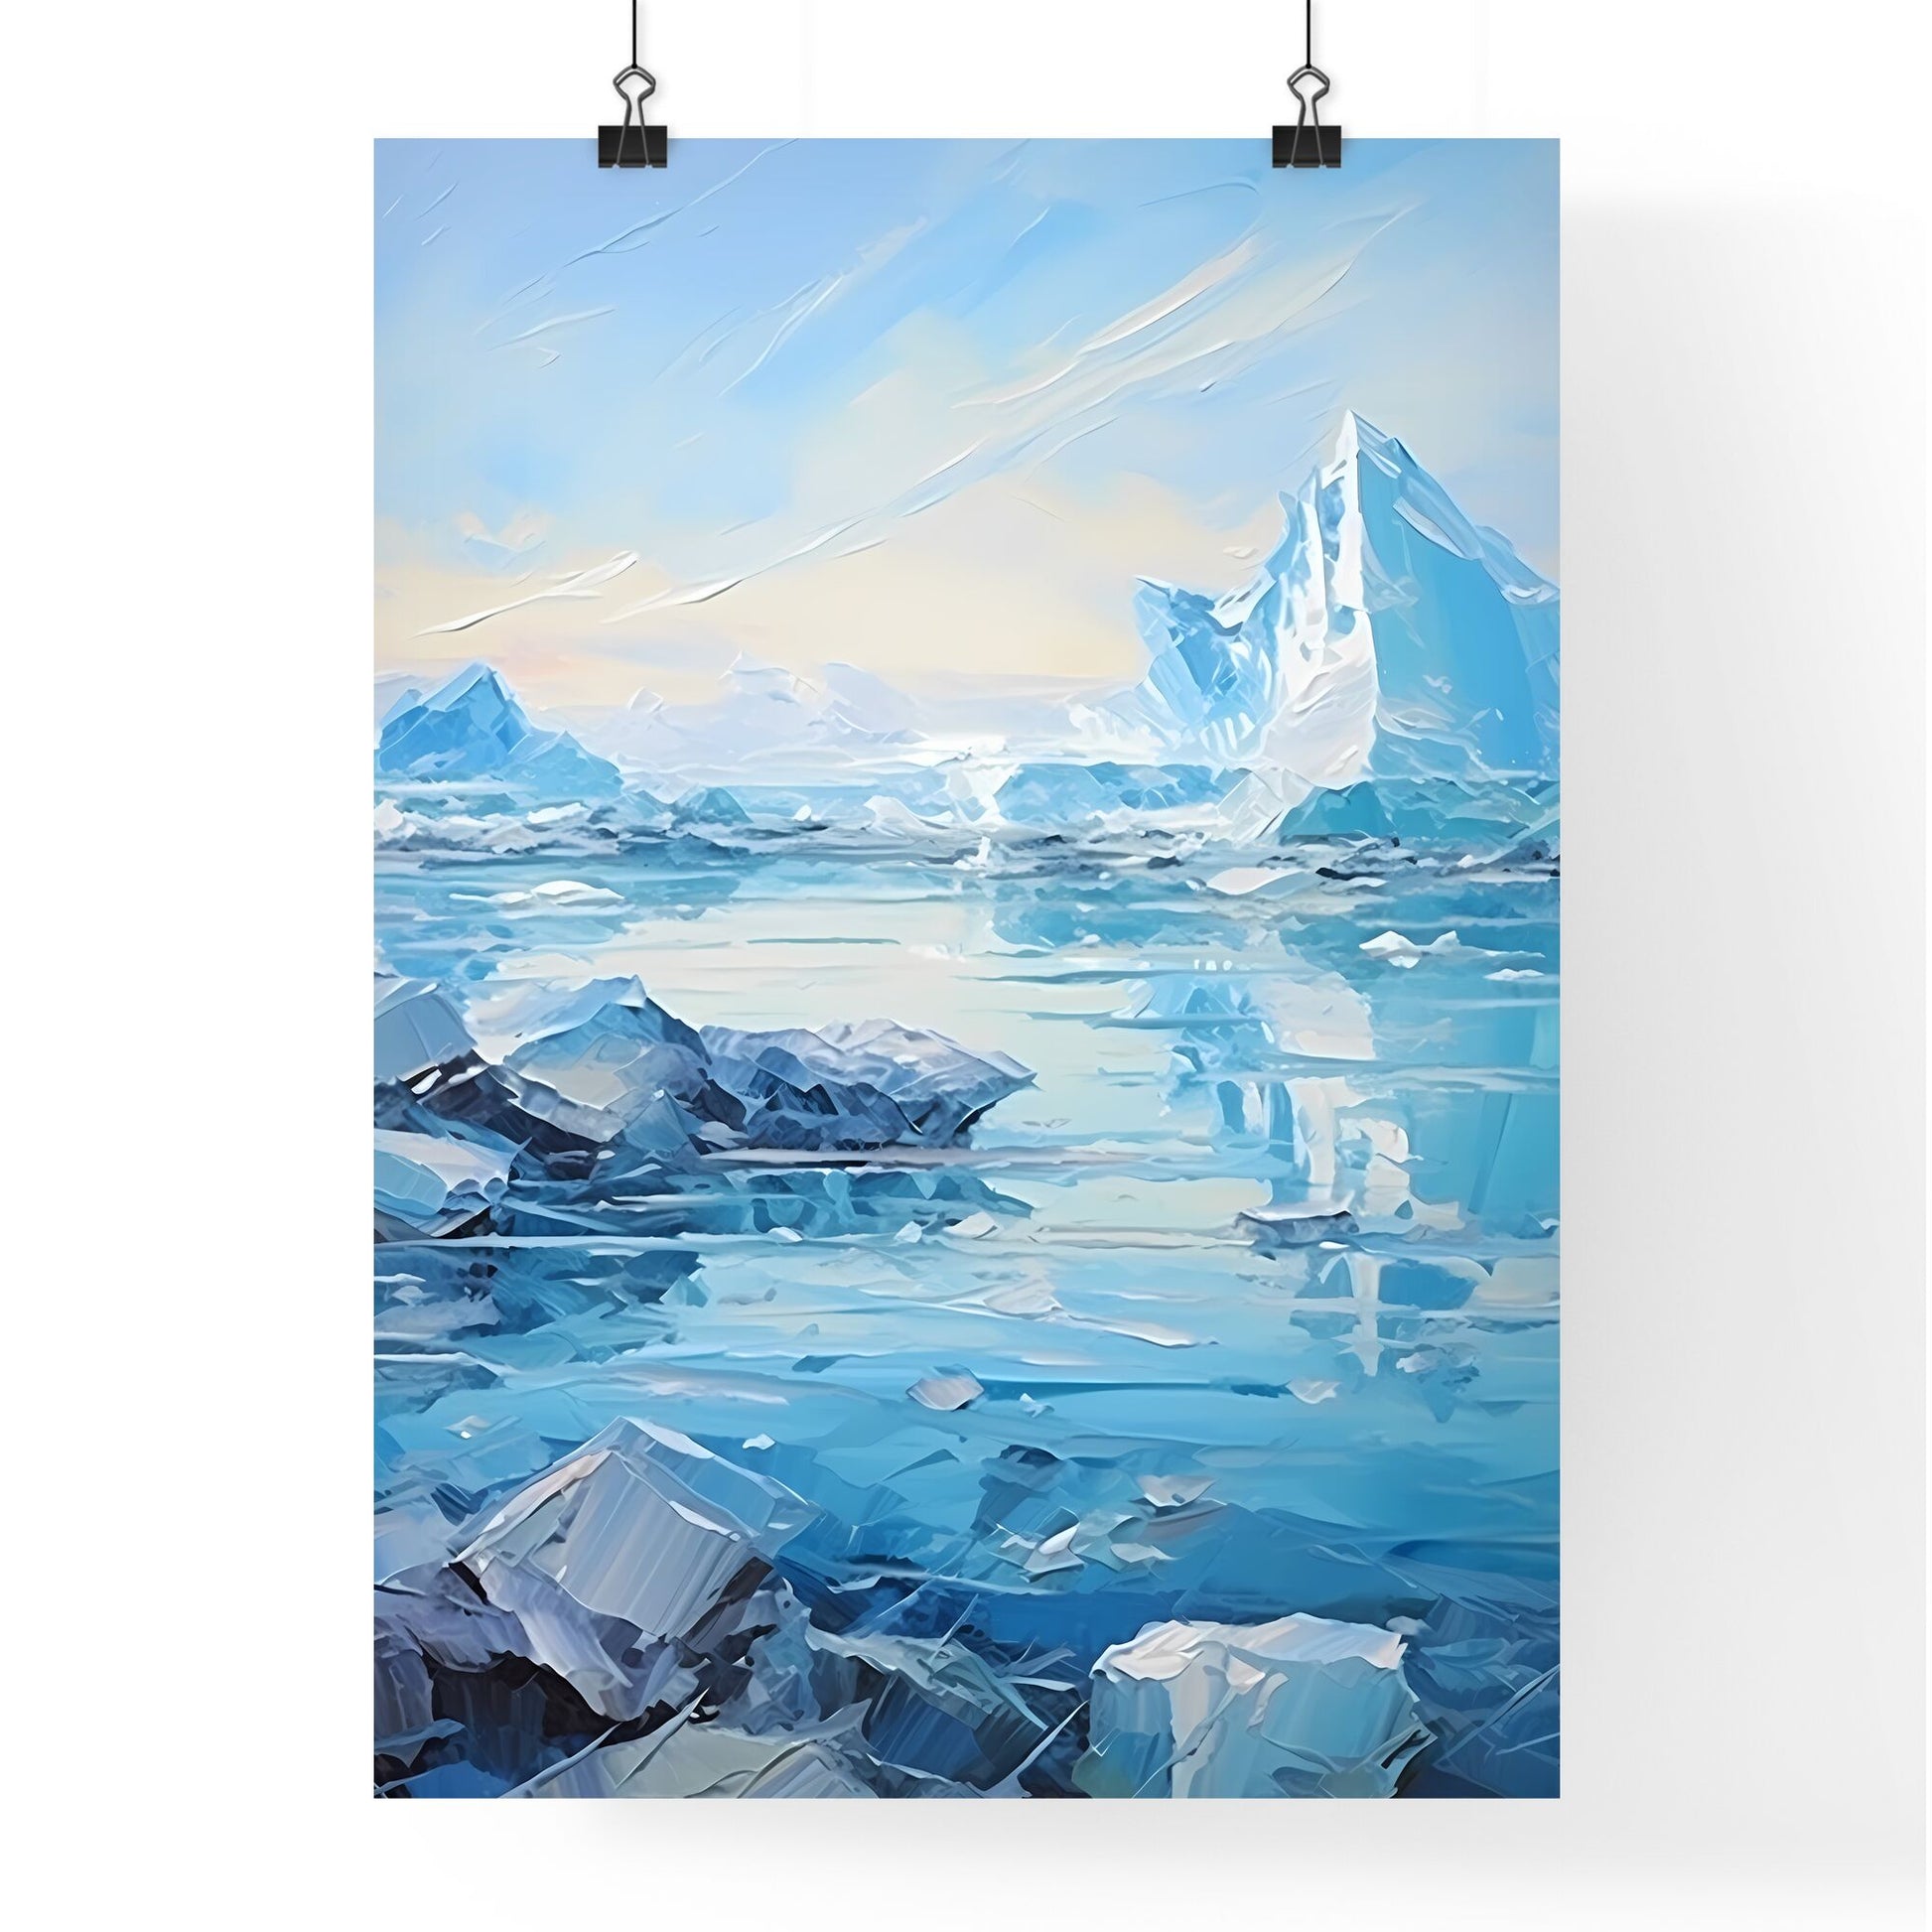 Icebergs And Glaciers Jokulsarlon Lagoon Iceland - A Painting Of Icebergs In The Water Default Title